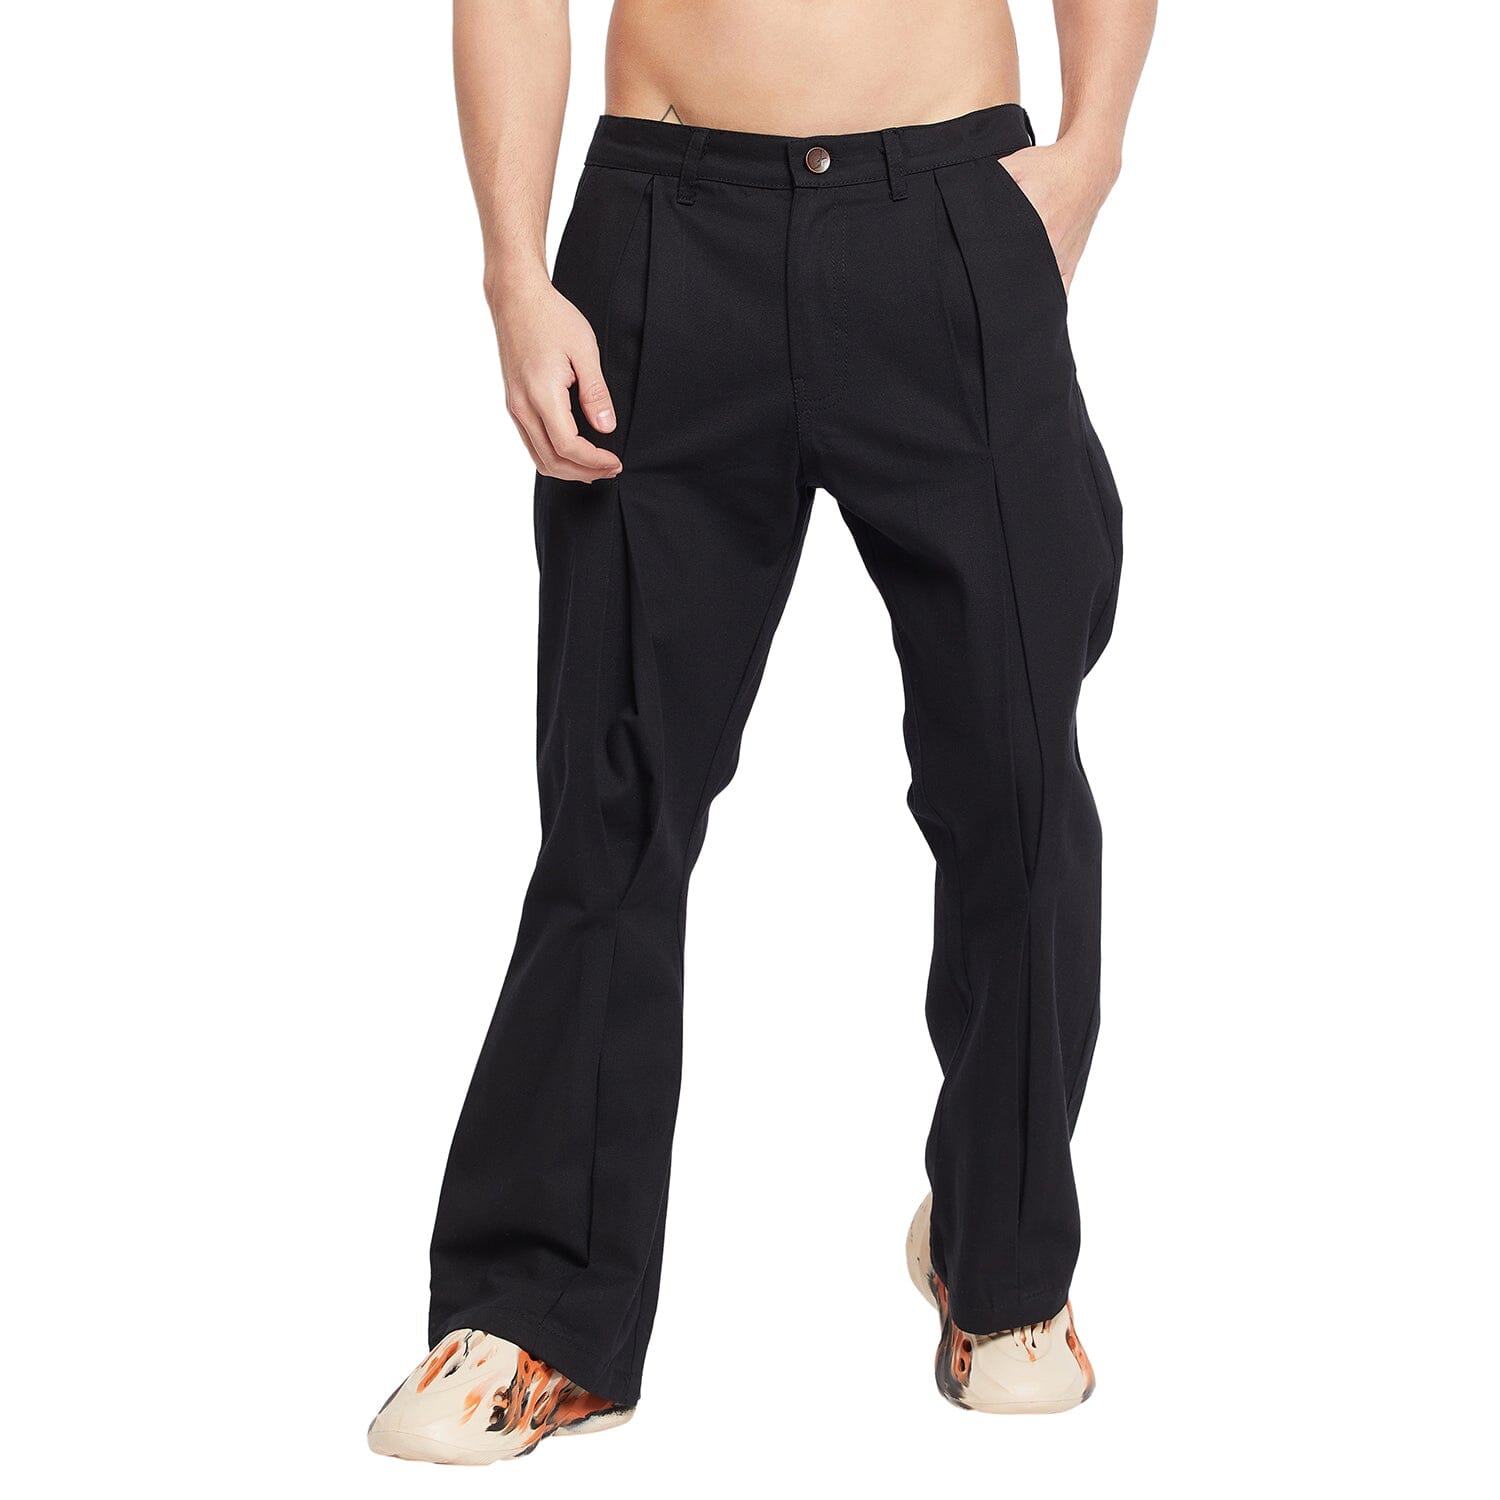 Black Pleated Flared Trousers, Buy Men Trousers